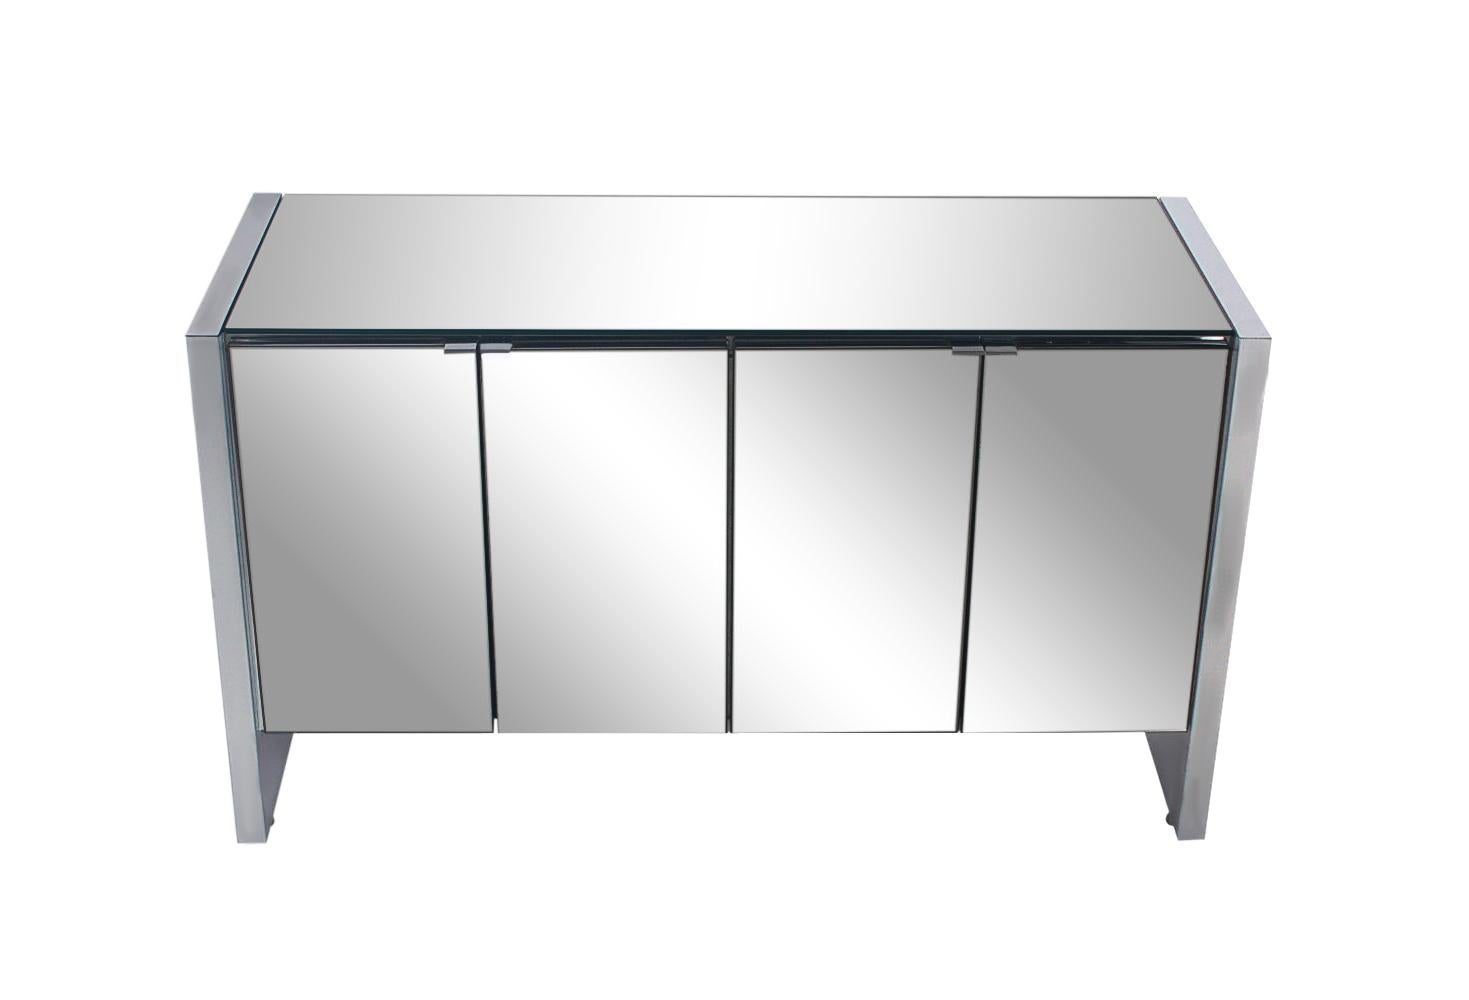 Late 20th Century Mid-Century Modern Mirror and Chrome Four Door Cabinet or Credenza For Sale